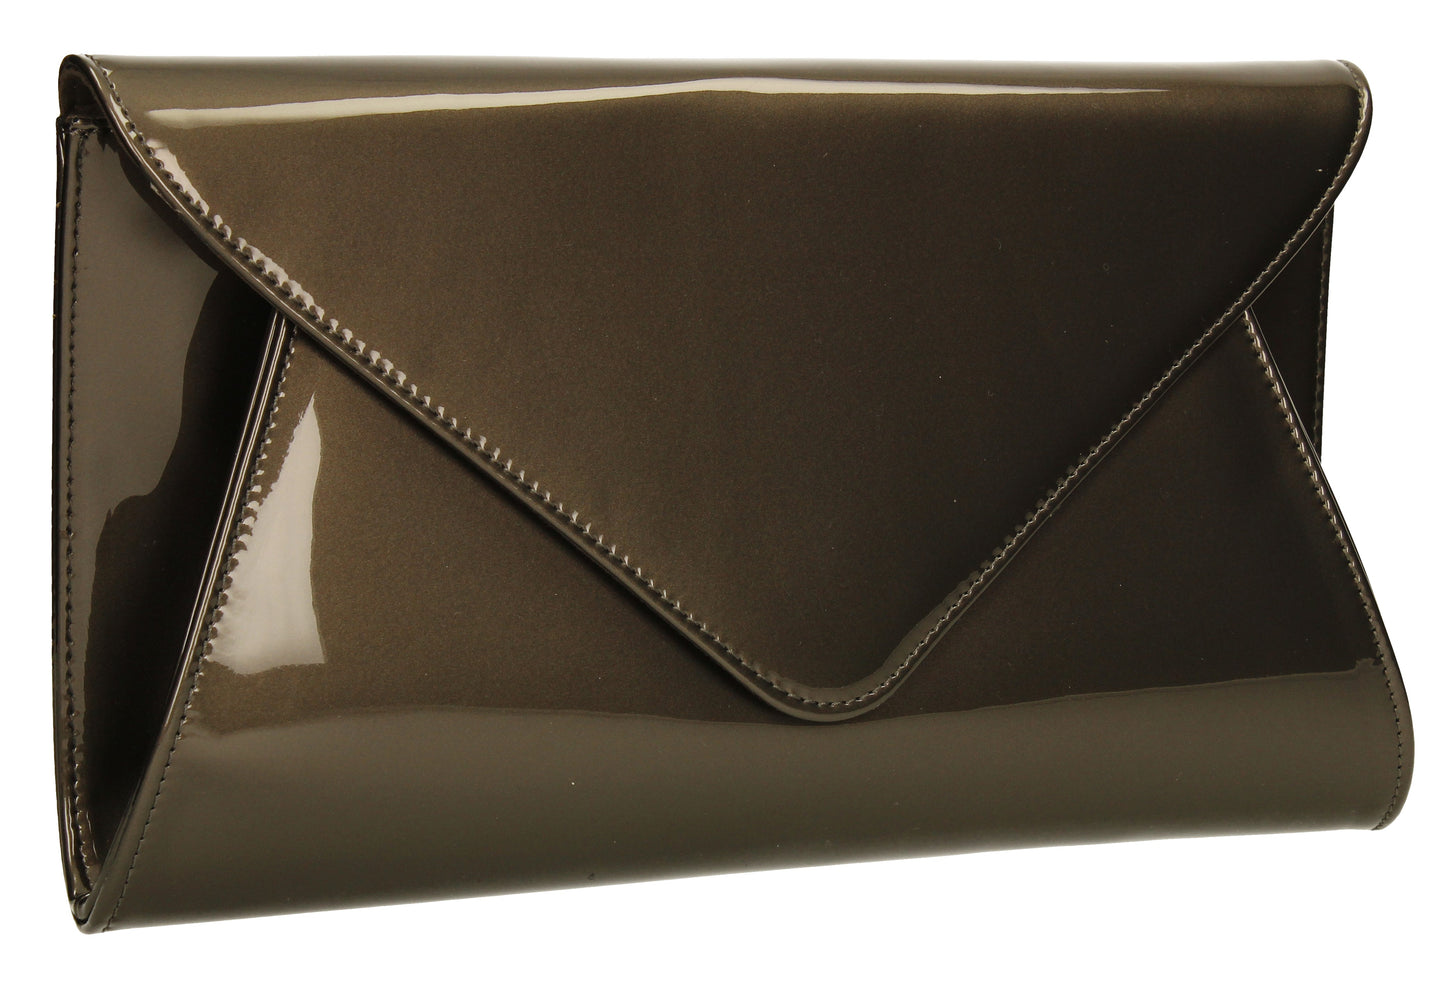 SWANKYSWANS Juliet Patent Envelope Clutch Bag Pewter Cute Cheap Clutch Bag For Weddings School and Work